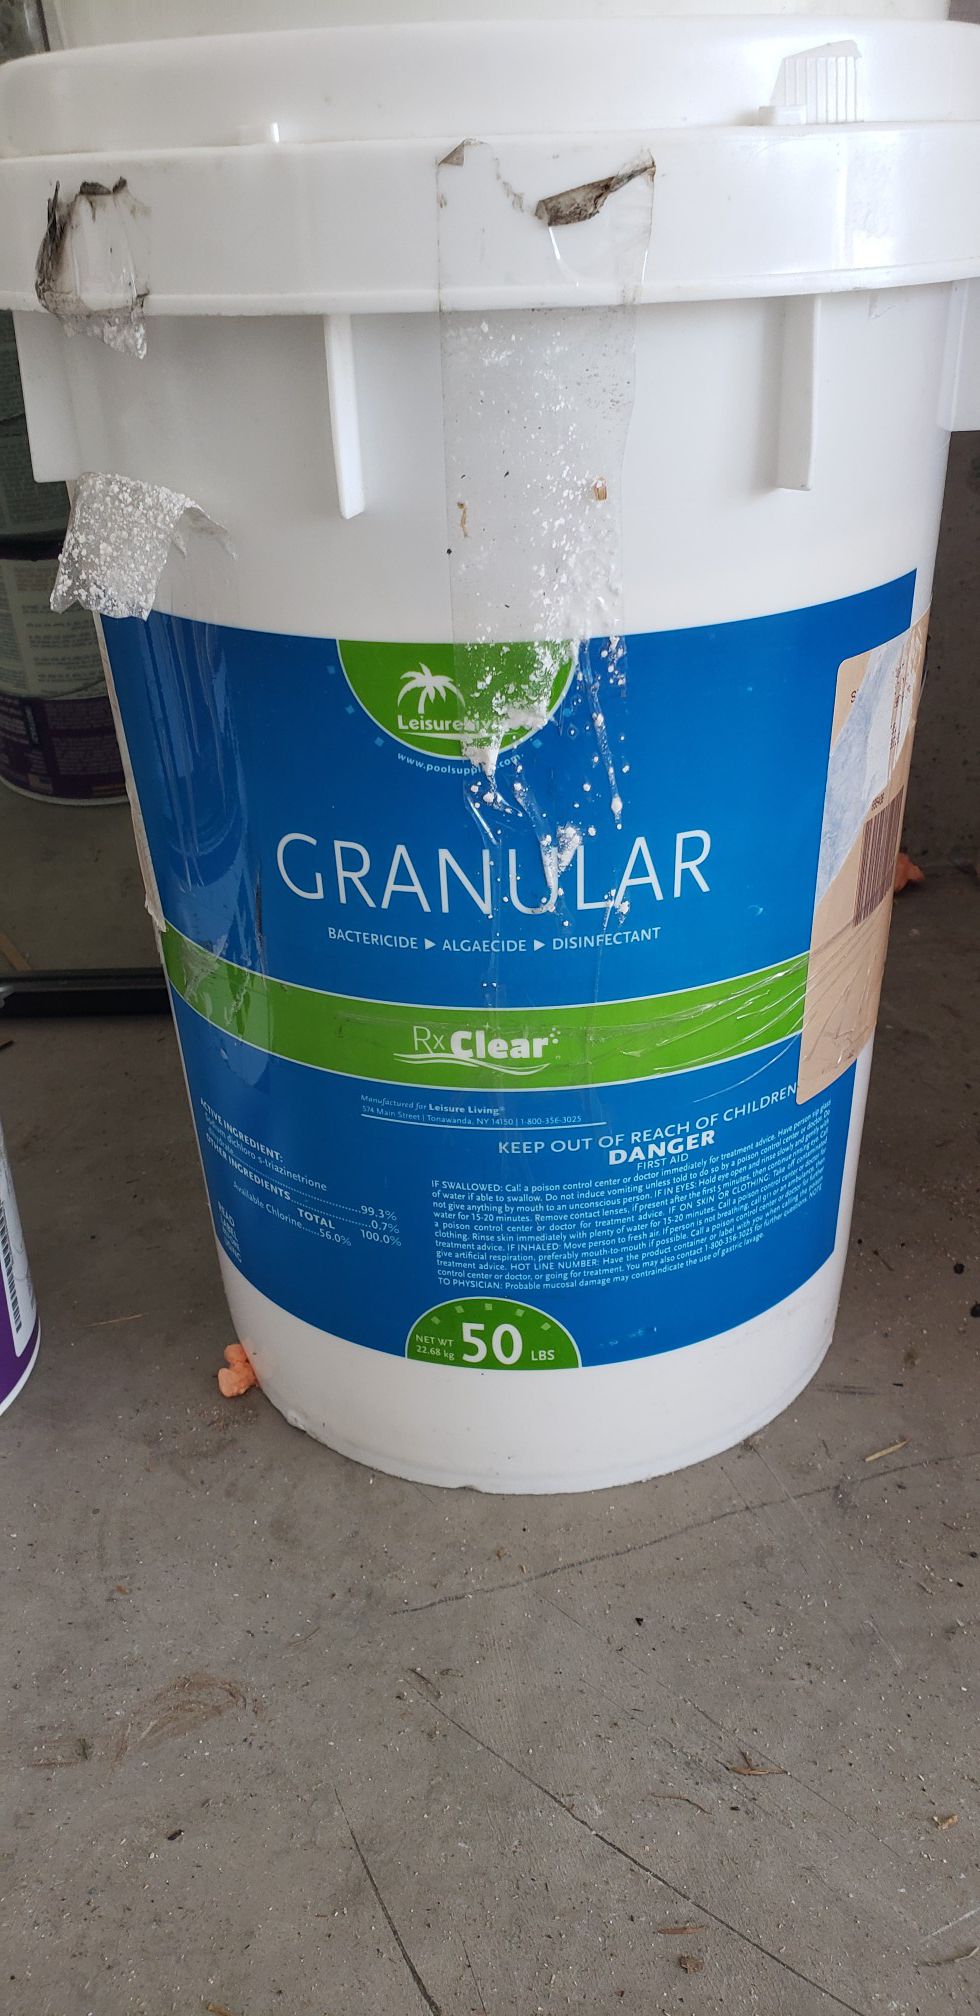 Leisure Living 50lb brand new 2 buckets of slow release chlorine tablets and one 5 gal bucket of granular chlorine.